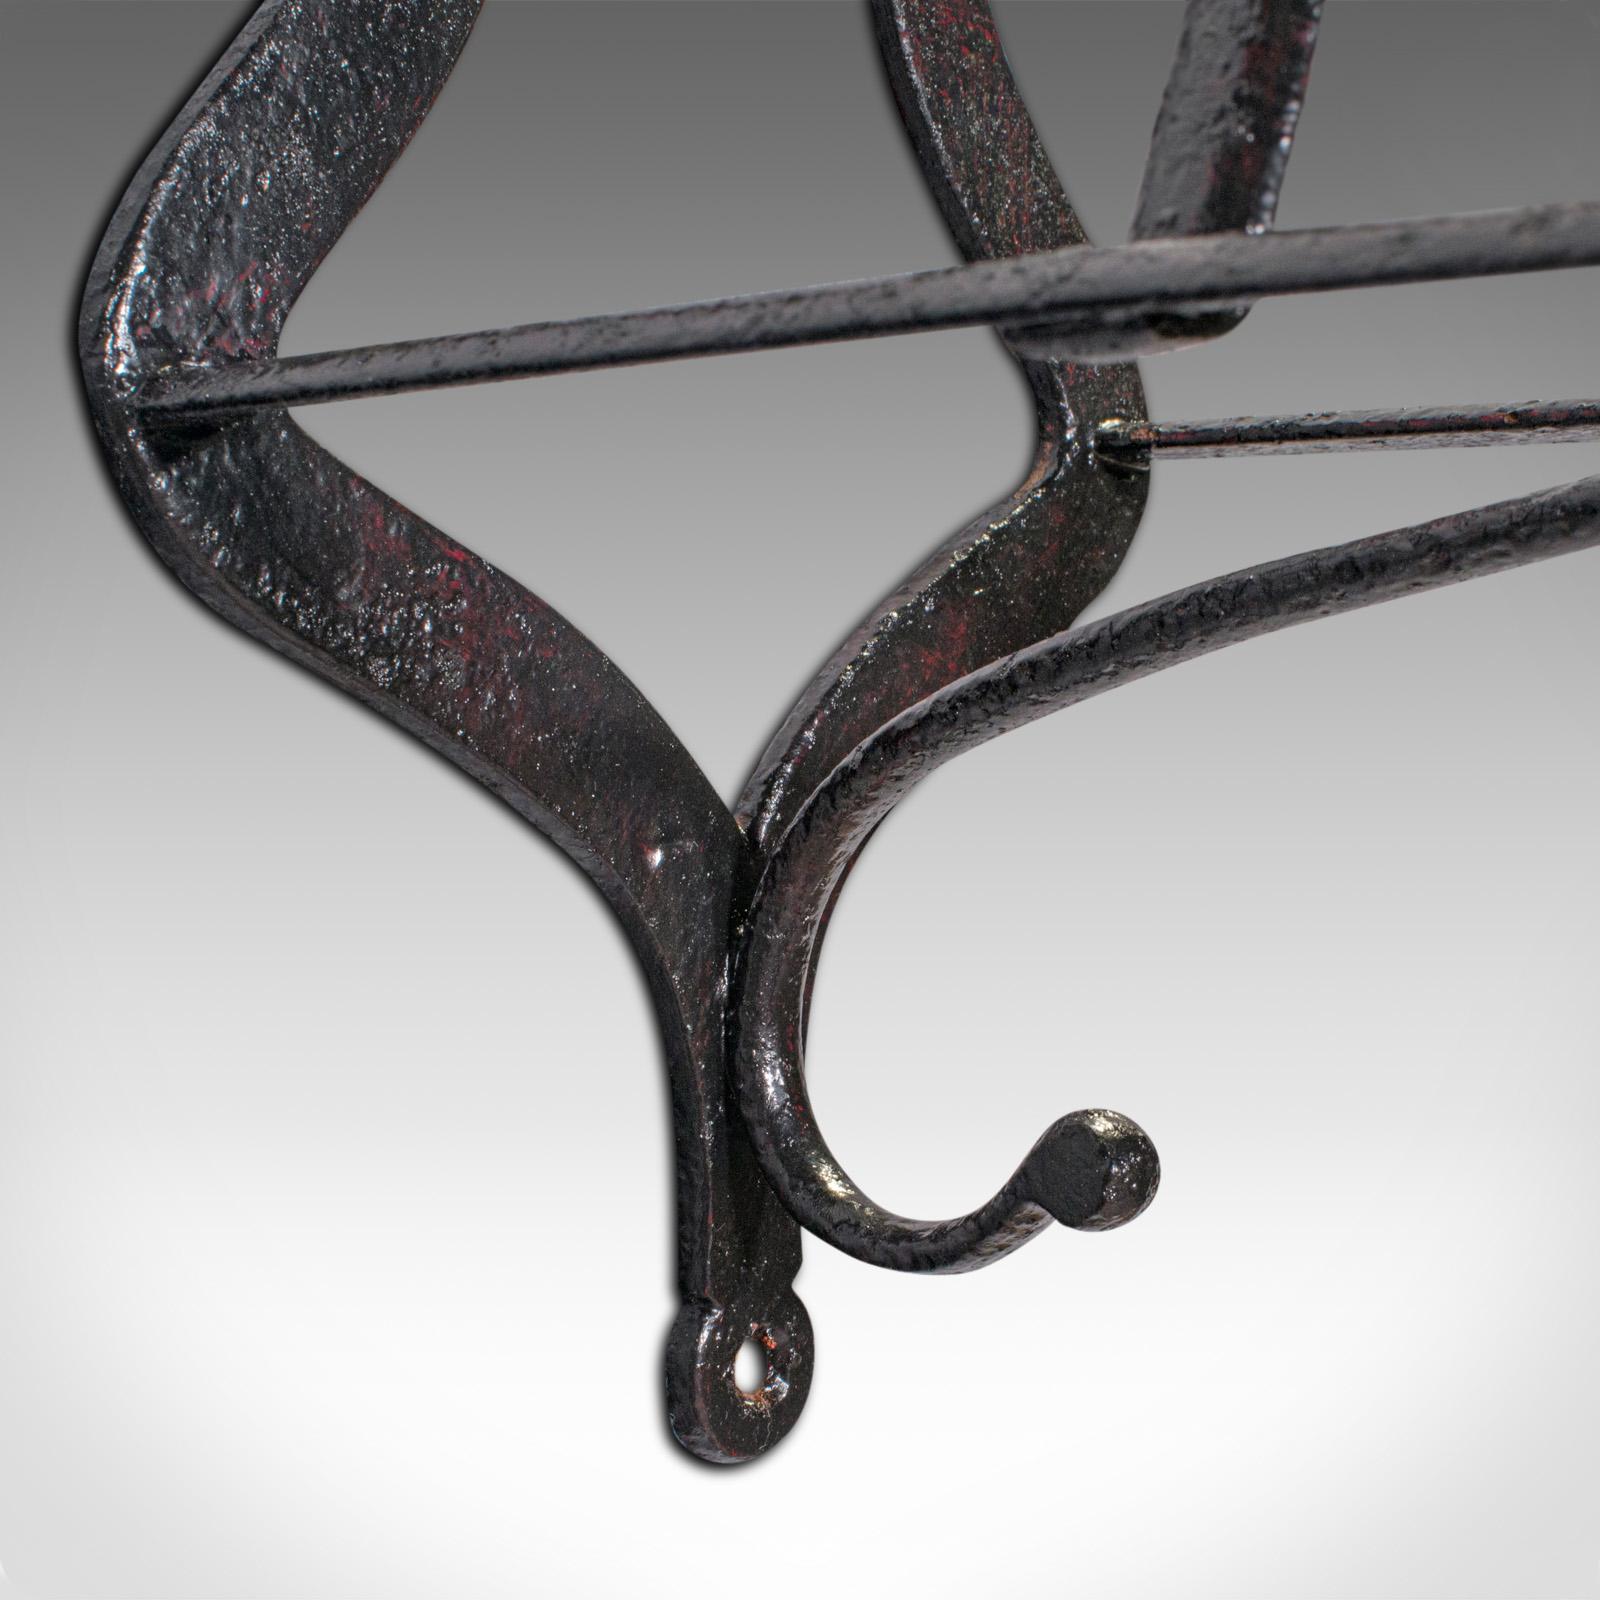 19th Century Antique Duck Bill Saddle Rack, English Cast Iron Equestrian Tack Rest, Victorian For Sale